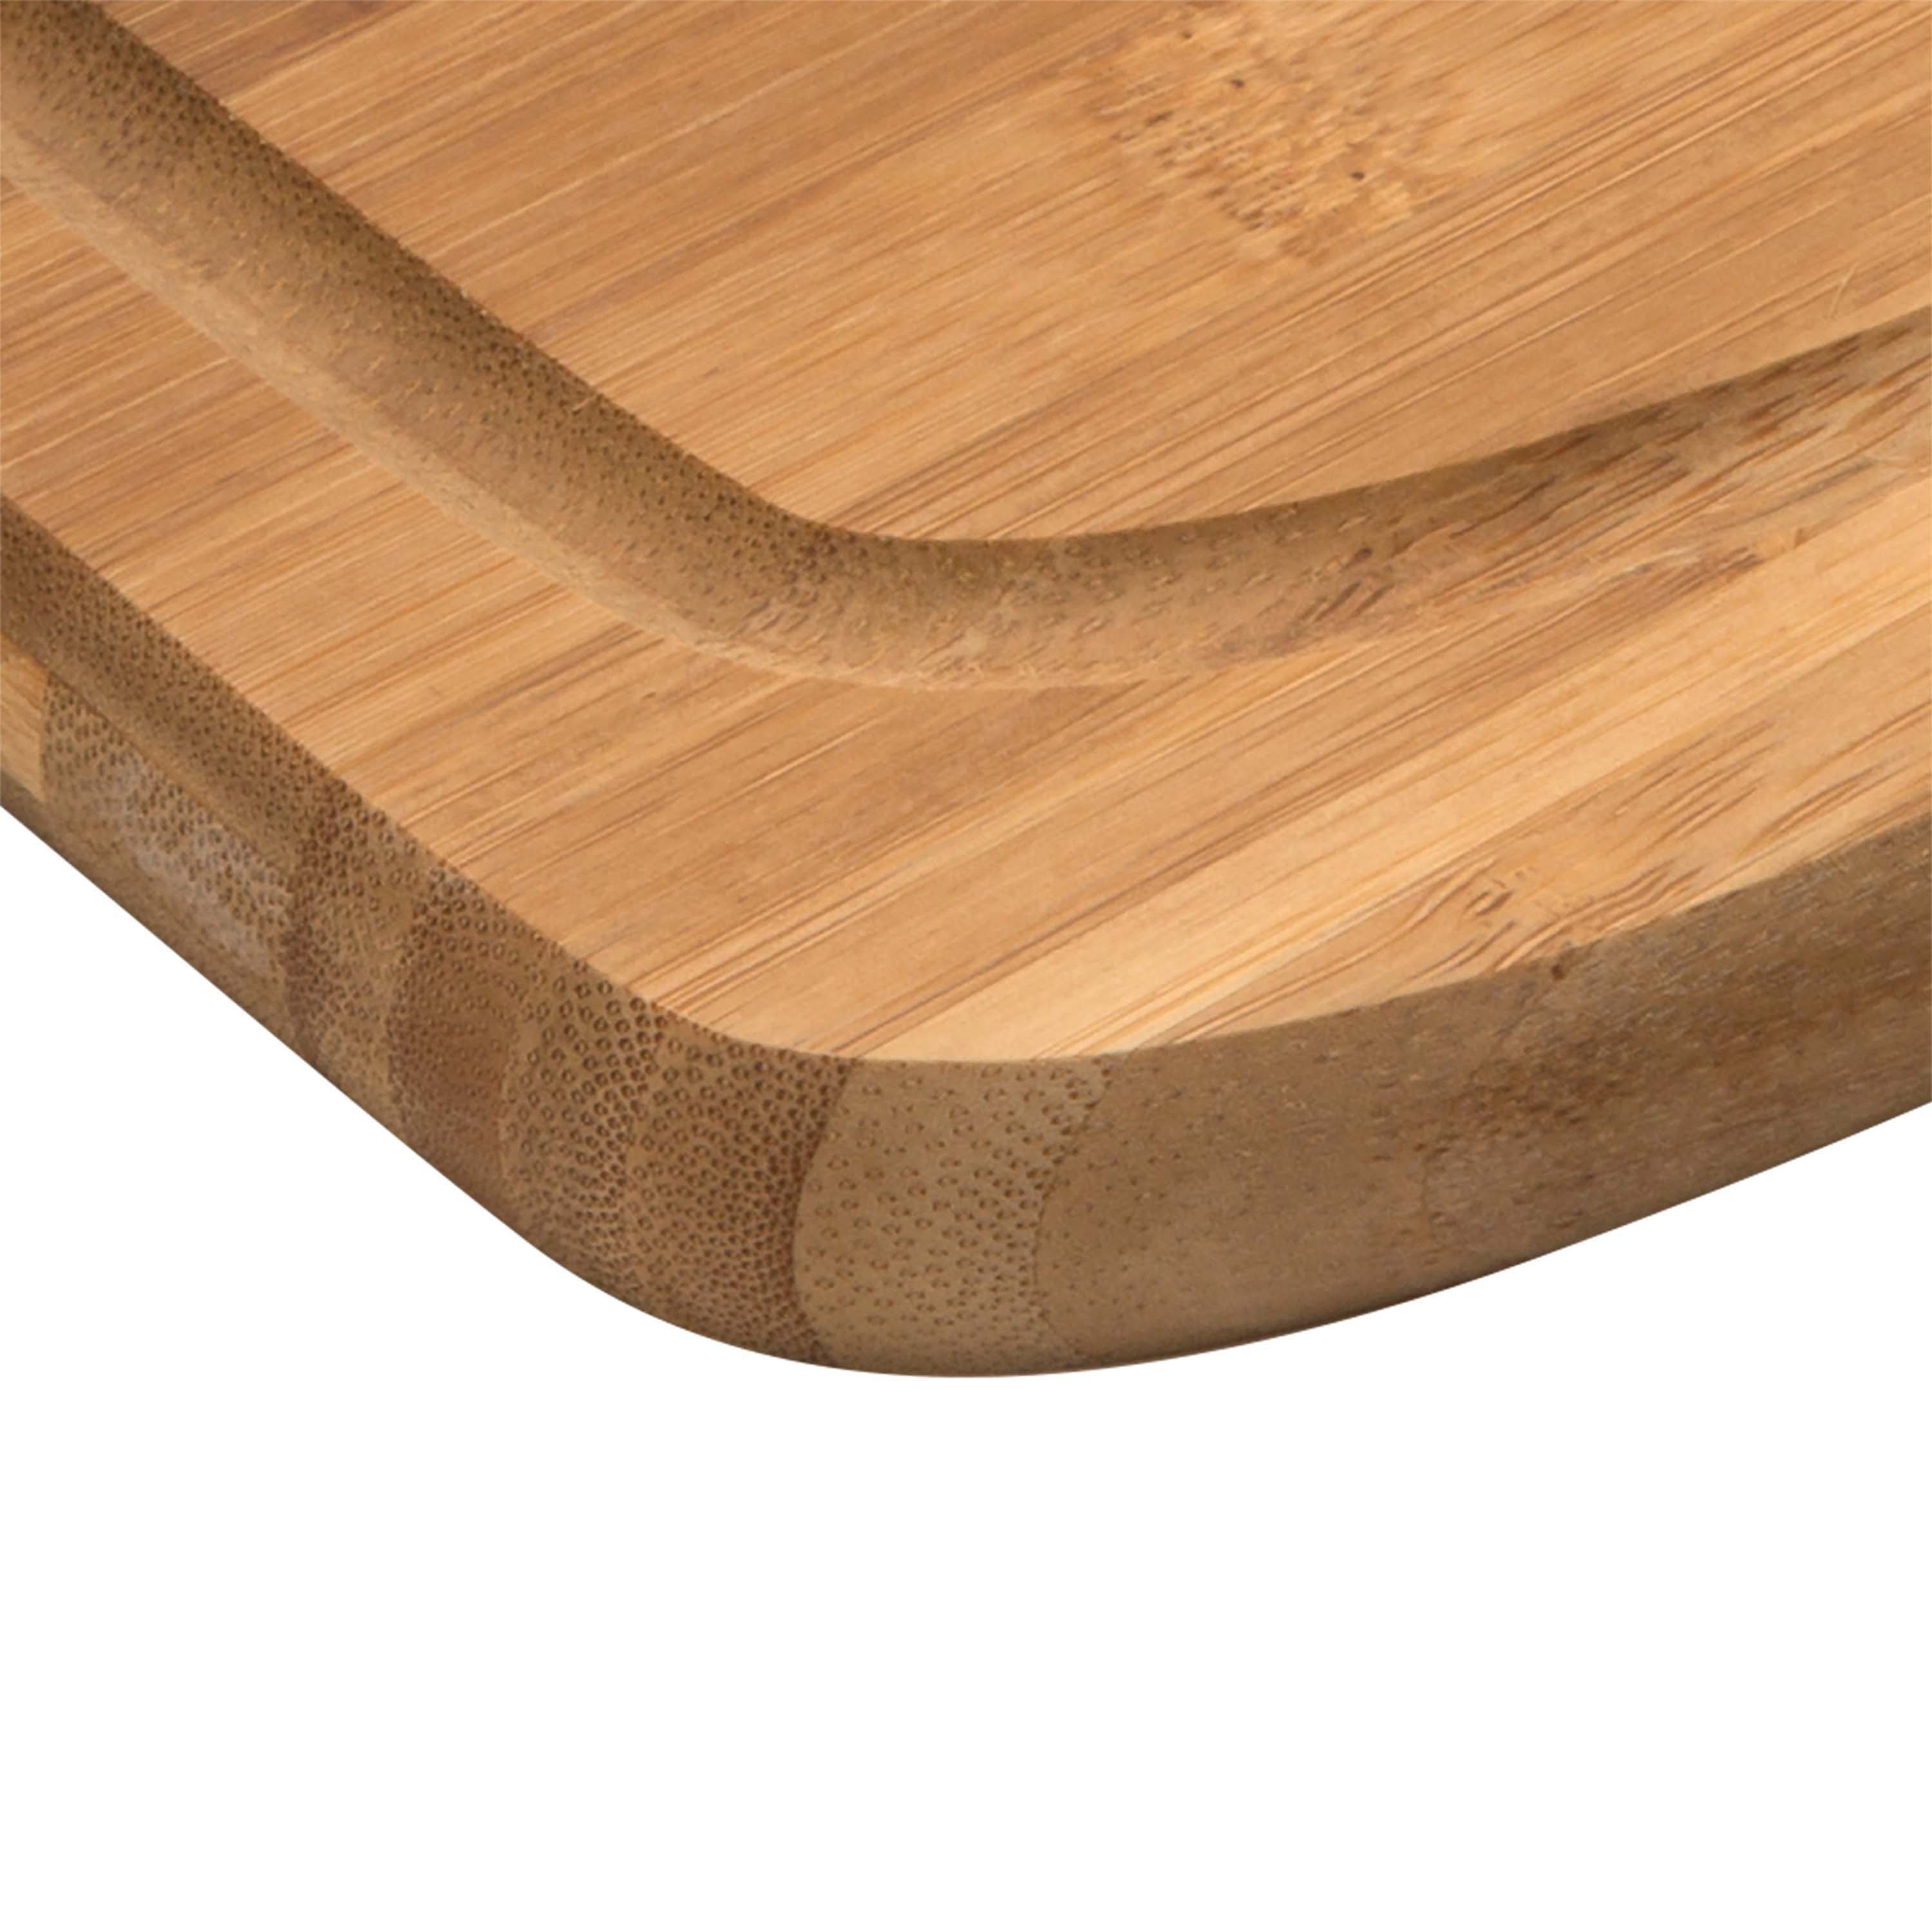 https://ak1.ostkcdn.com/images/products/is/images/direct/acf3f060eae92b345b9d11423aa17ba9ddf2c817/Kitchen-Details-Curved-Bamboo-Cutting-Board.jpg